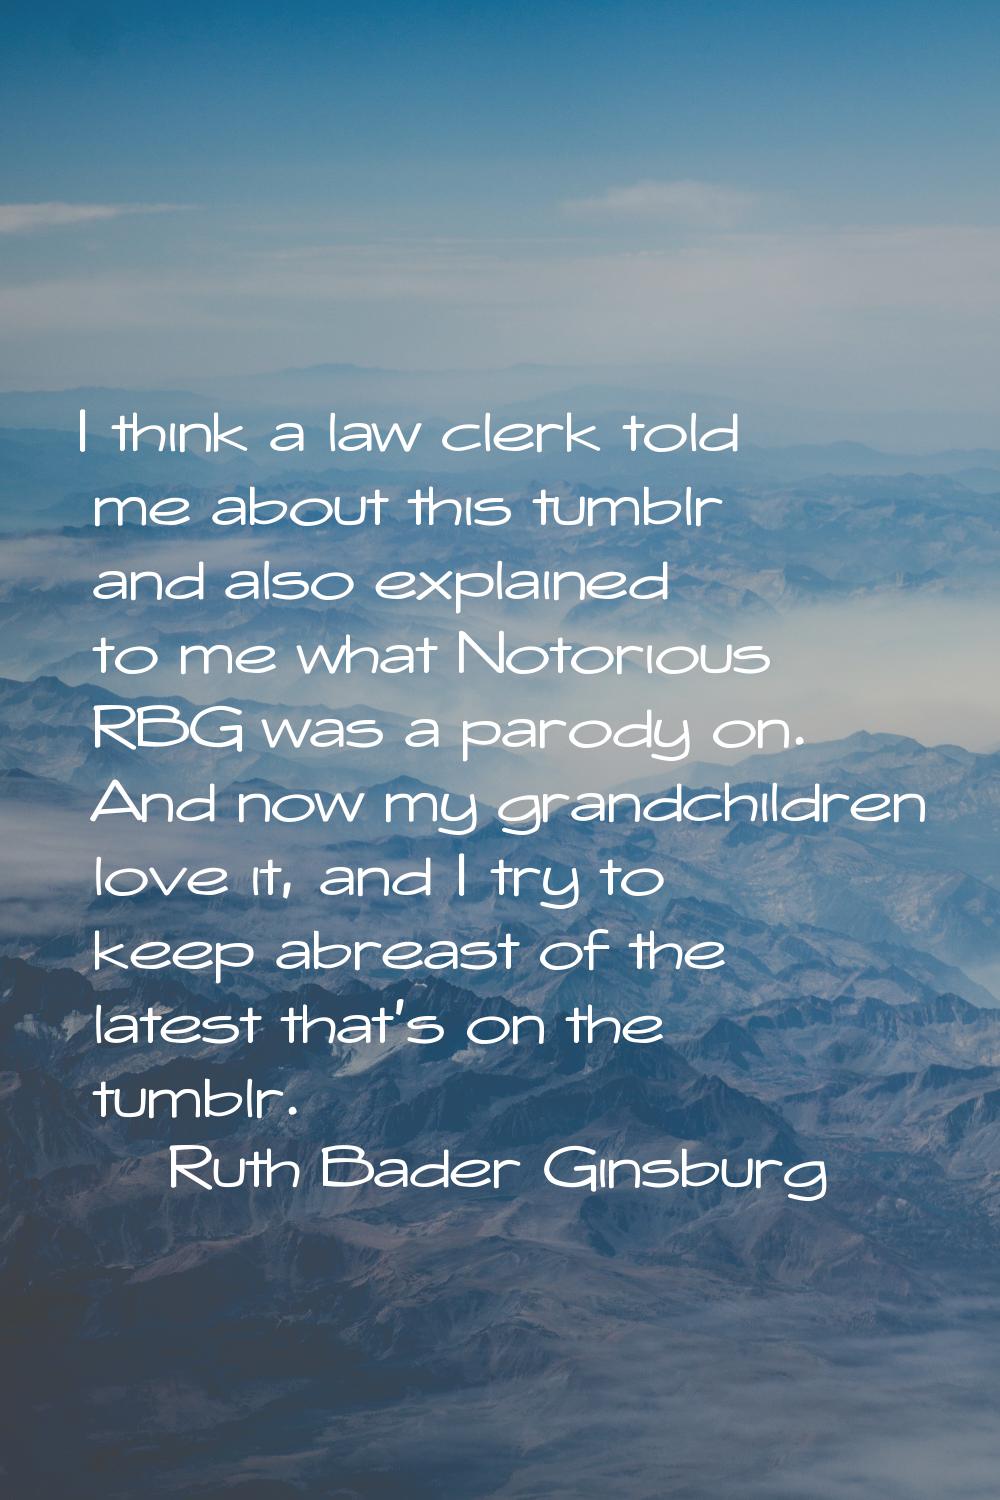 I think a law clerk told me about this tumblr and also explained to me what Notorious RBG was a par